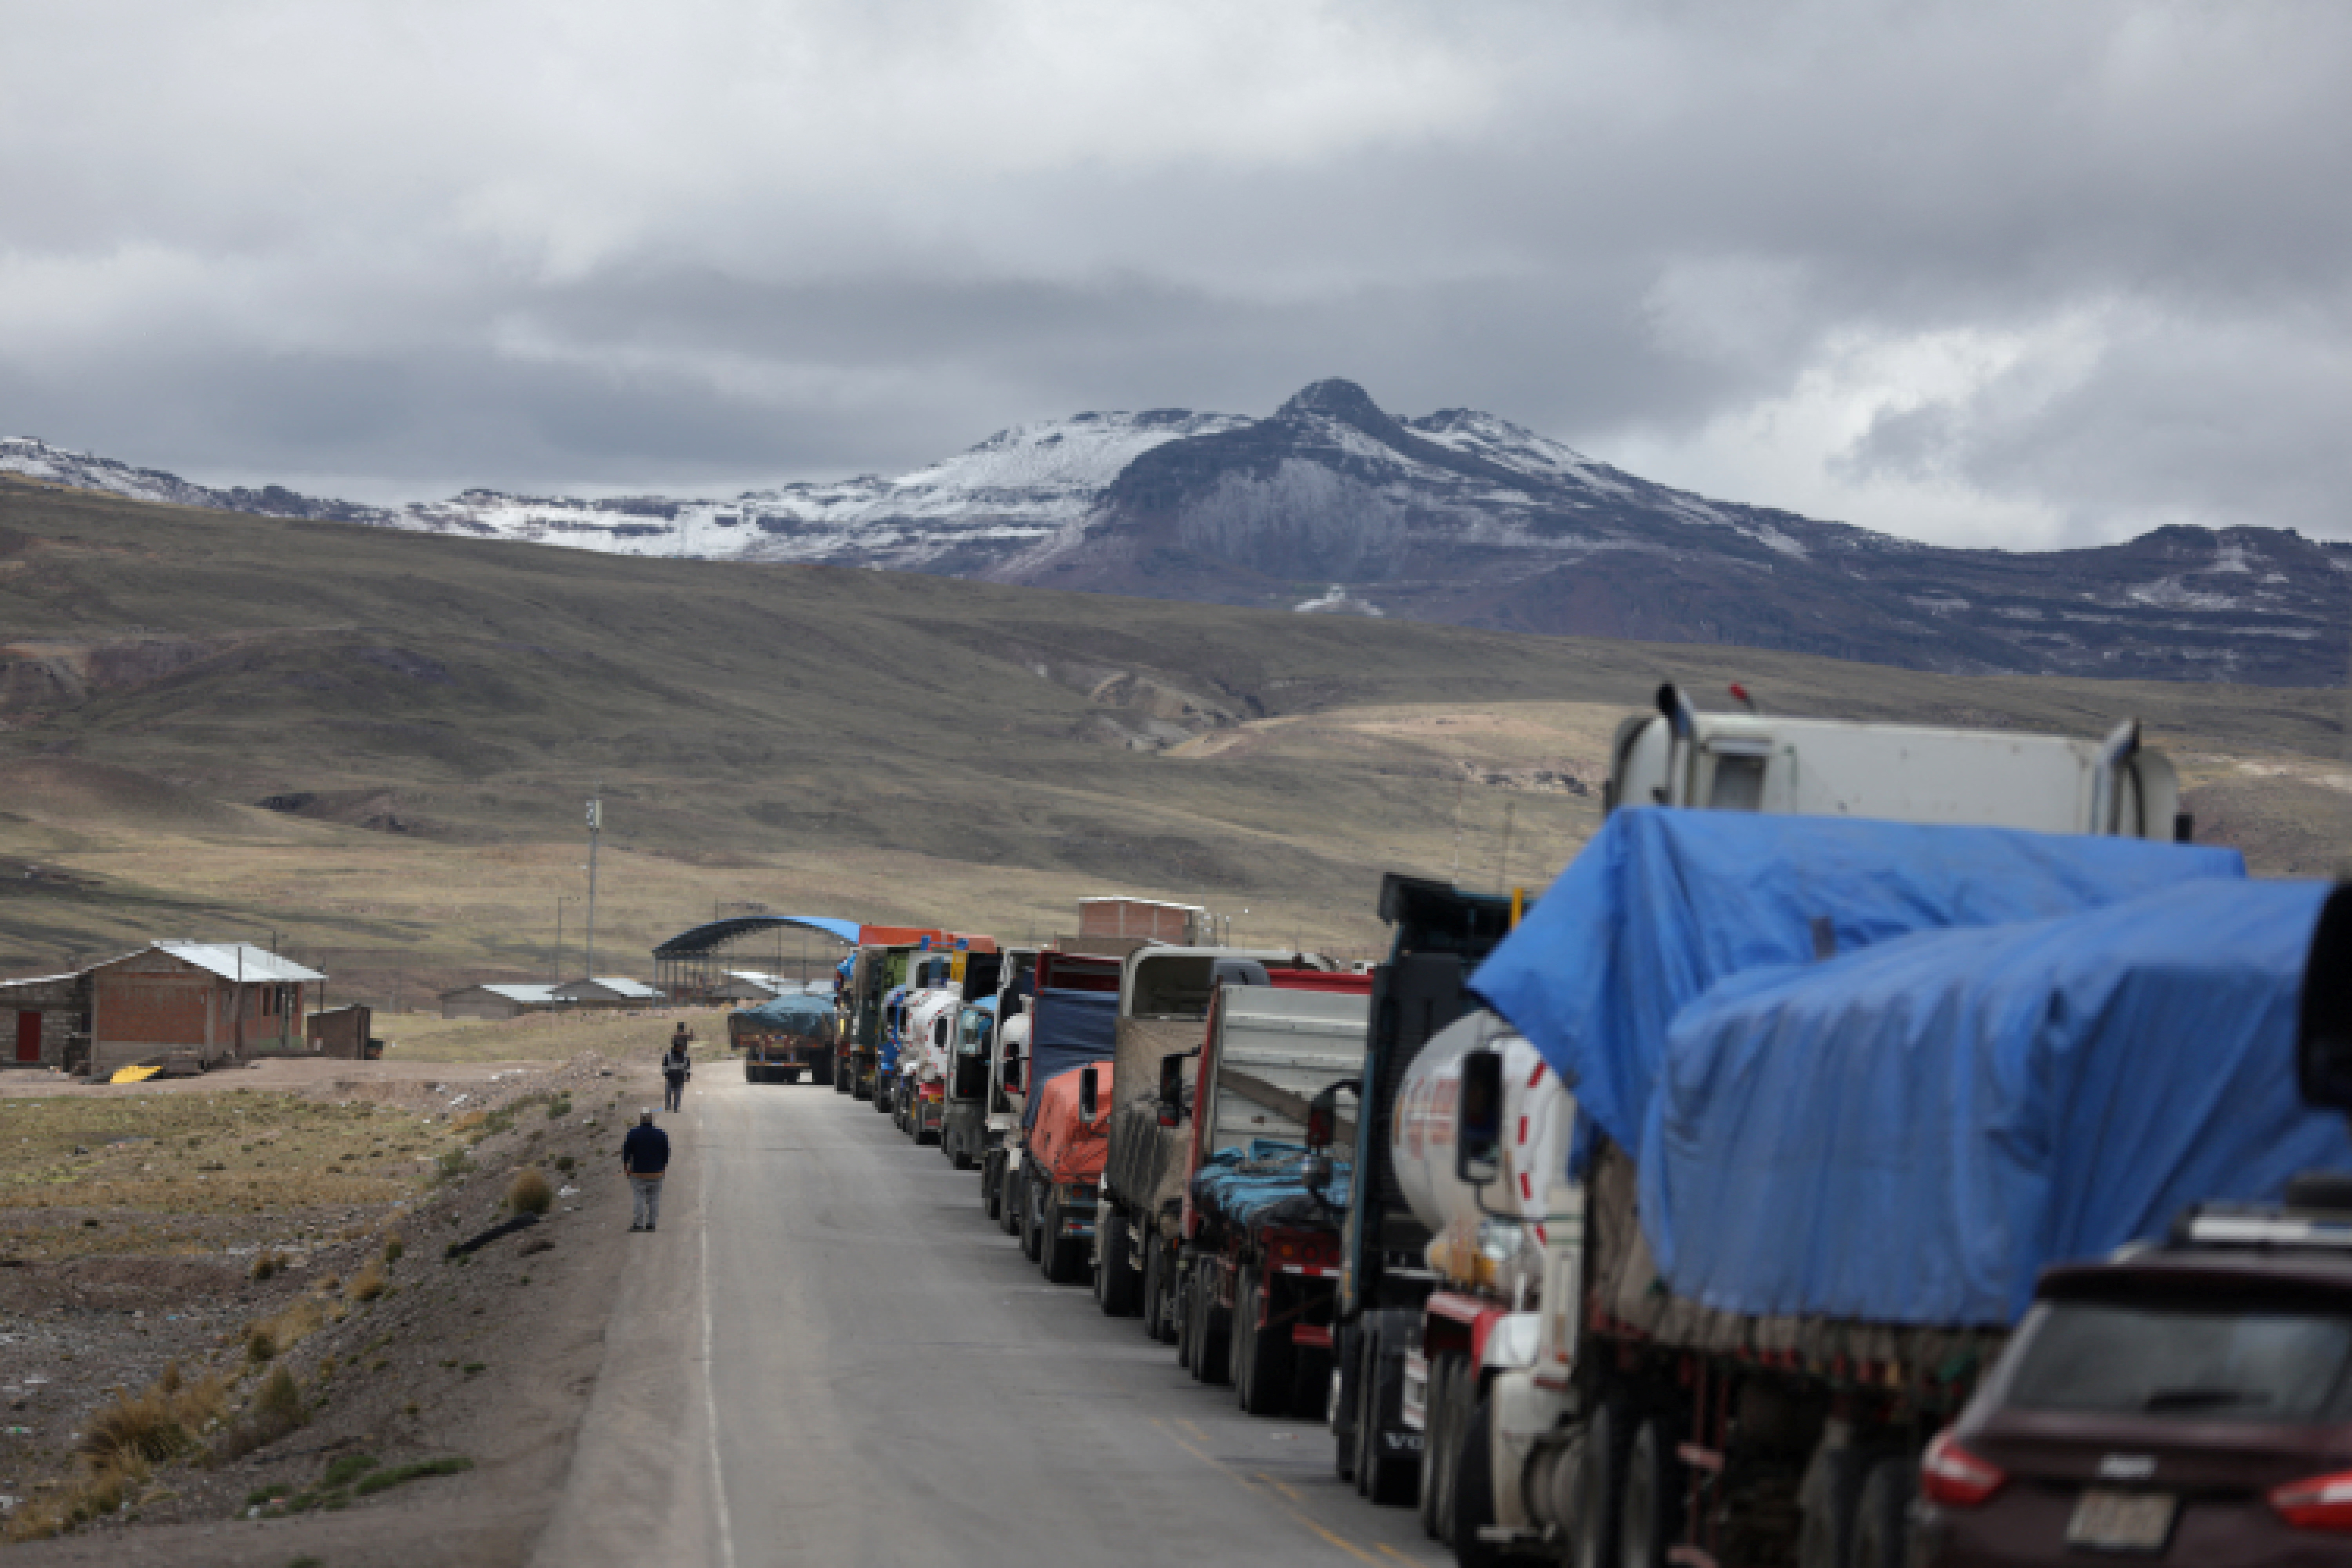 Trucks remain stuck during a roadblock caused due to a demonstration by anti-government protestors, in Condoroma